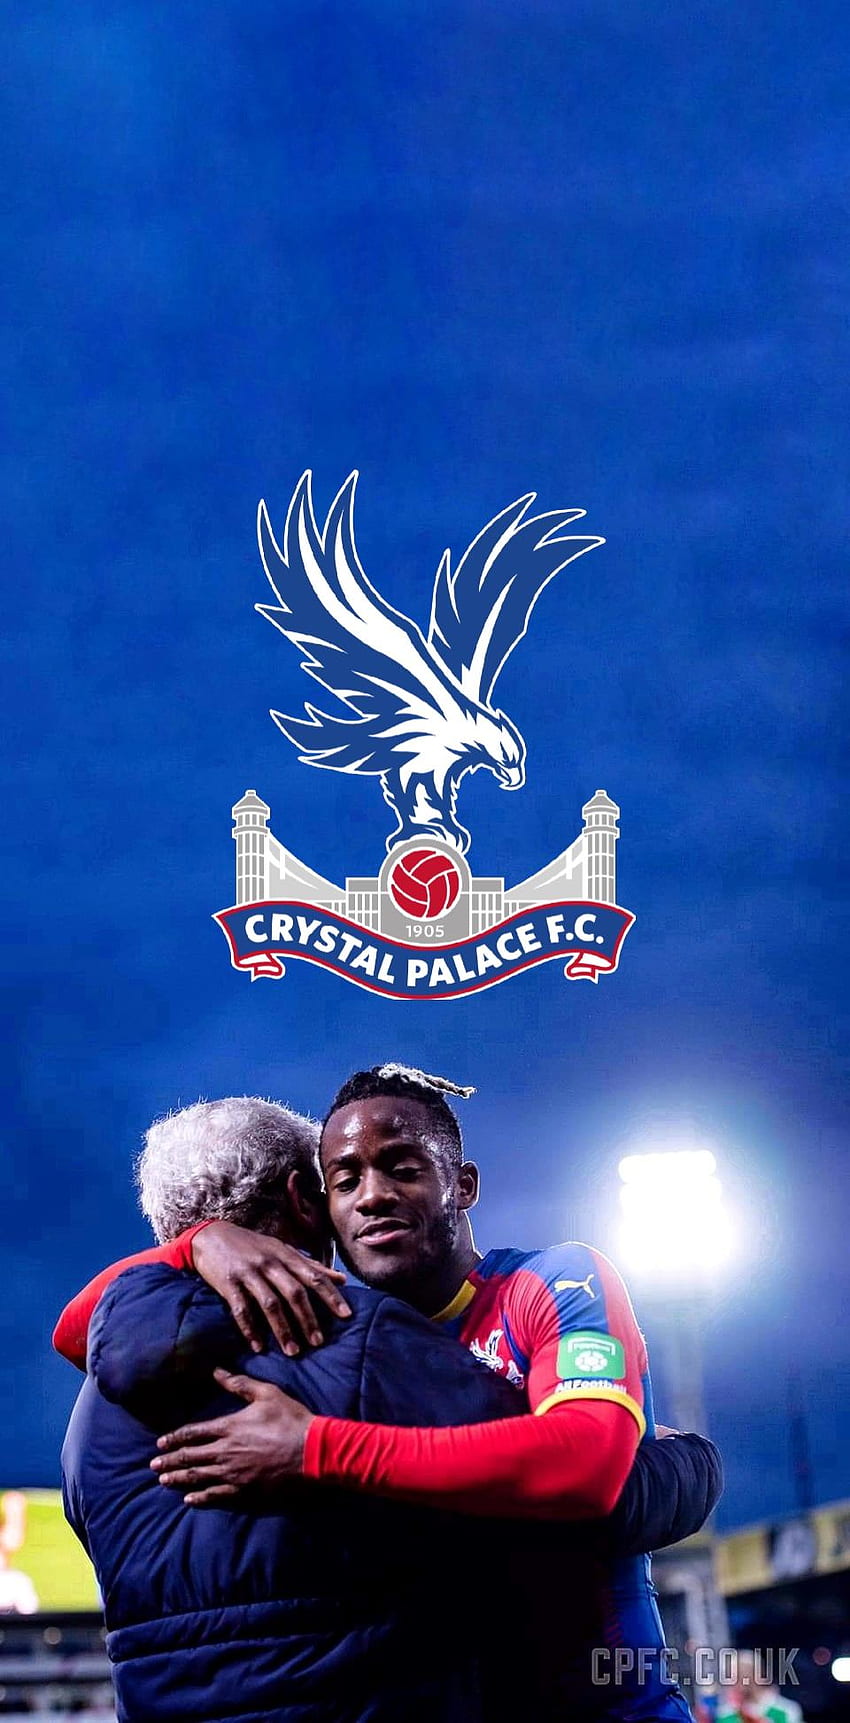 Made this quick phone in honour of our new goal saviour (and with enough room for the clock at the top), Crystal Palace FC HD phone wallpaper